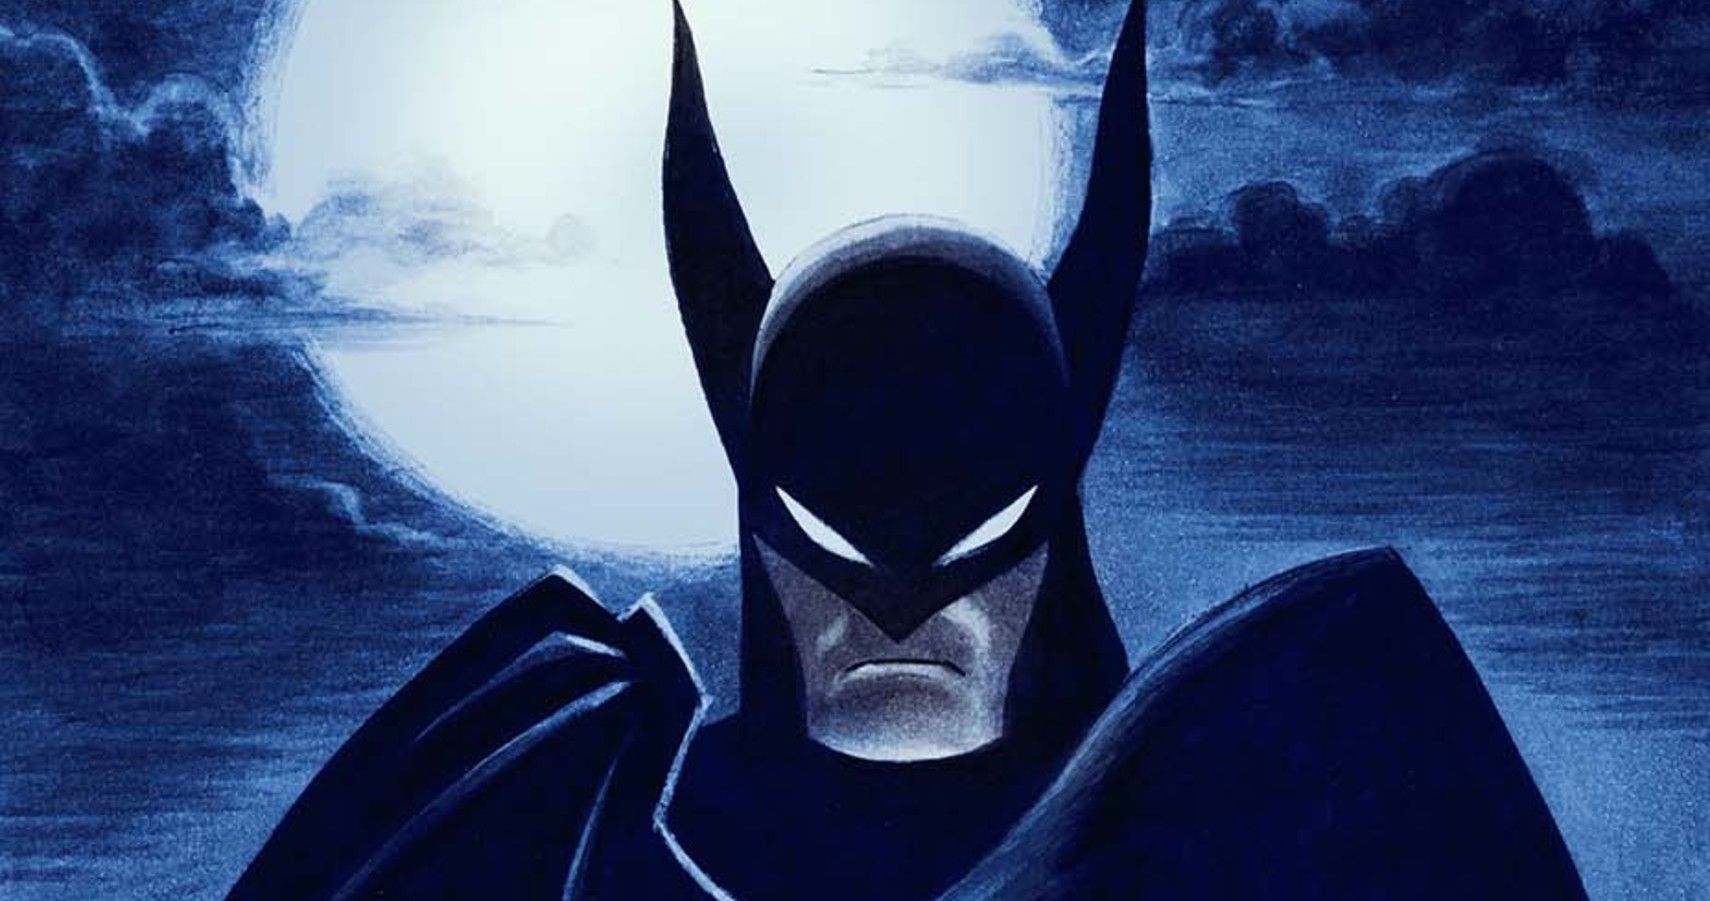 Batman Caped Crusader Could Be The Best Superhero Cartoon In A Generation